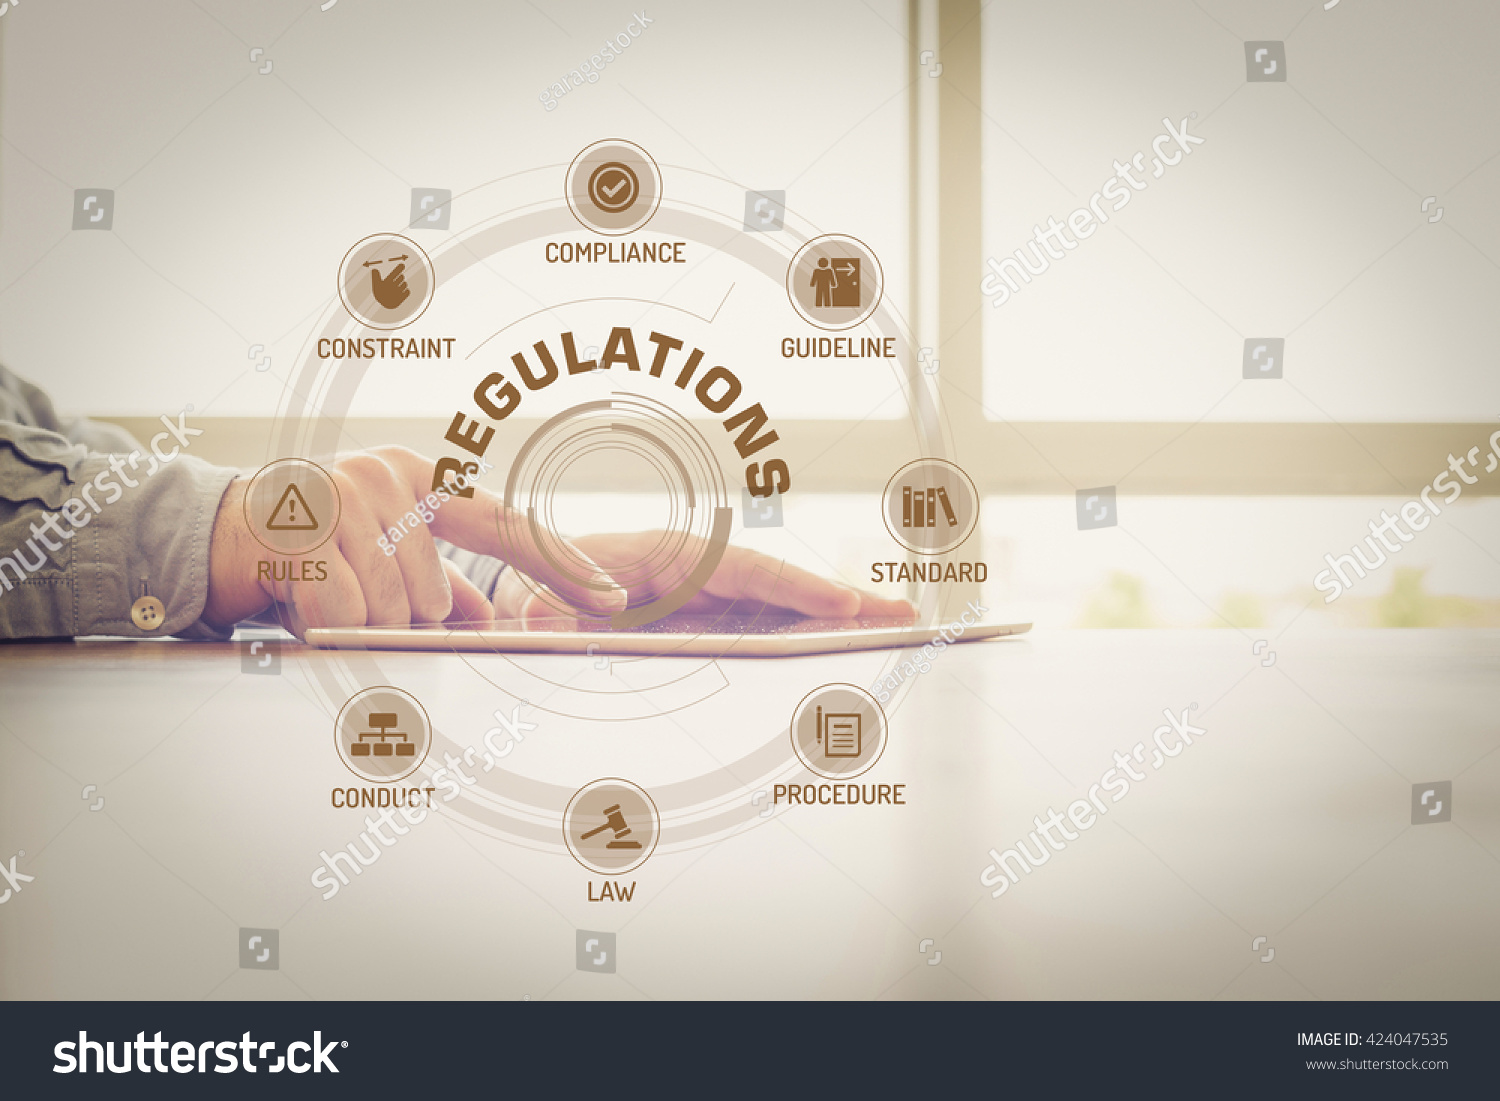 REGULATIONS chart with keywords and icons on screen #424047535